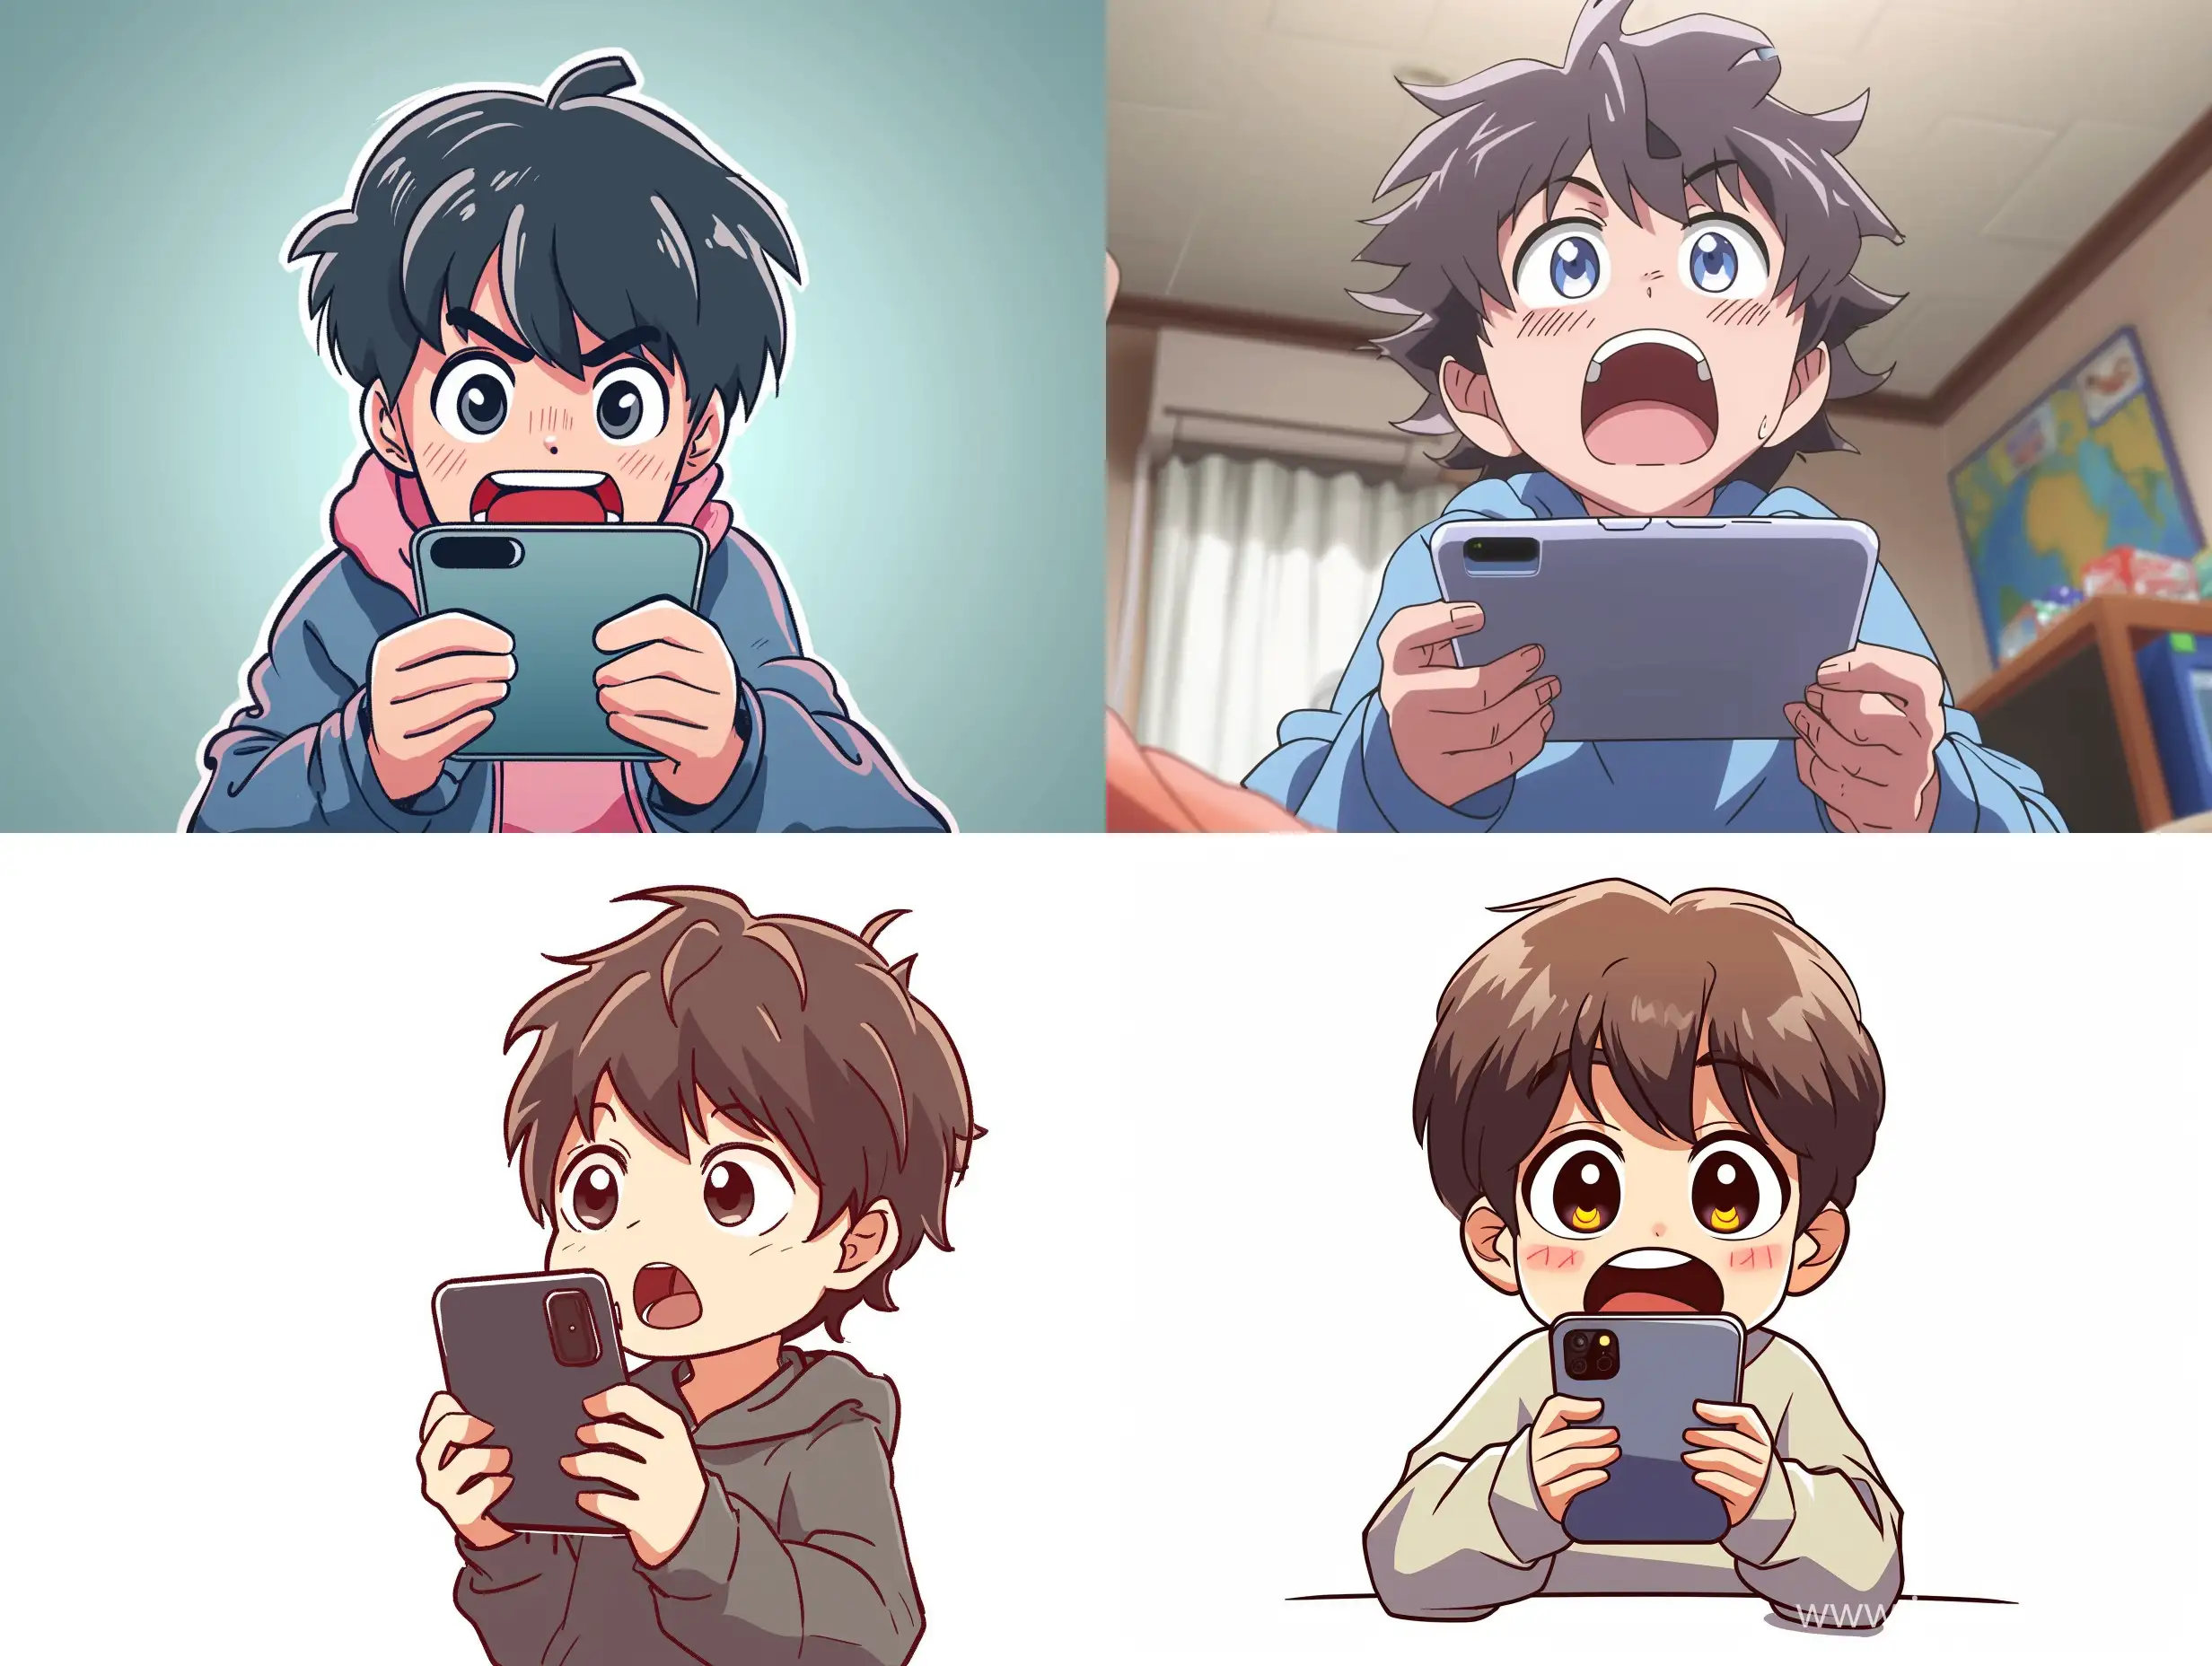 Excited-ChibiStyle-Boy-Playing-Game-on-Phone-Best-Quality-Wide-Shot